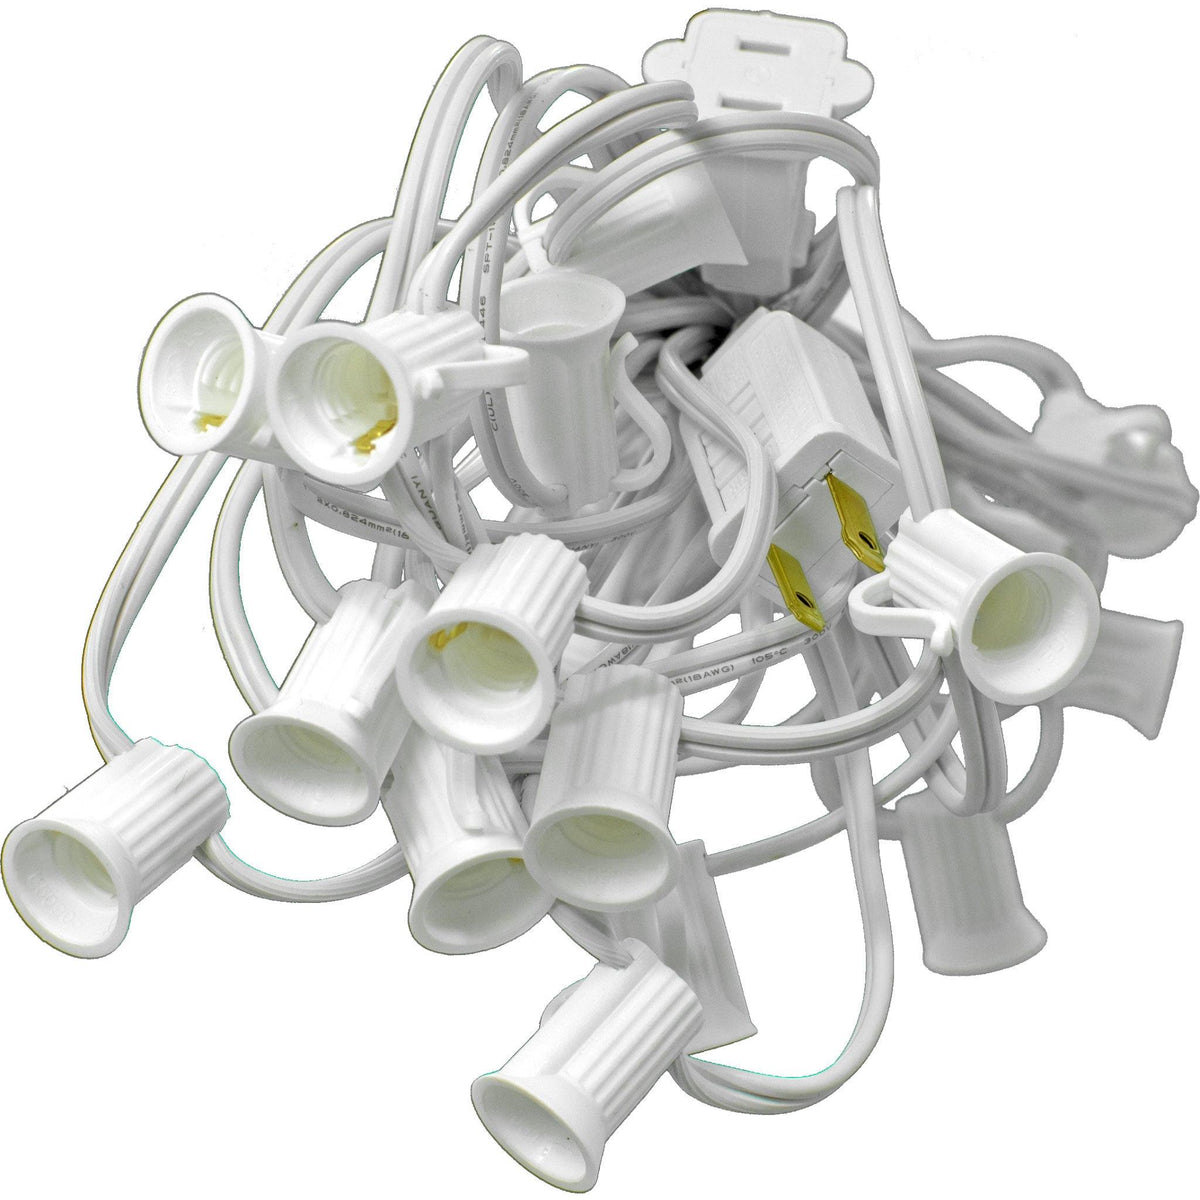 C7 C9 White Wire Patio String Cord for Outdoor Seasonal Temporary Lighting and Christmas Lights with 25 and 50 sockets.